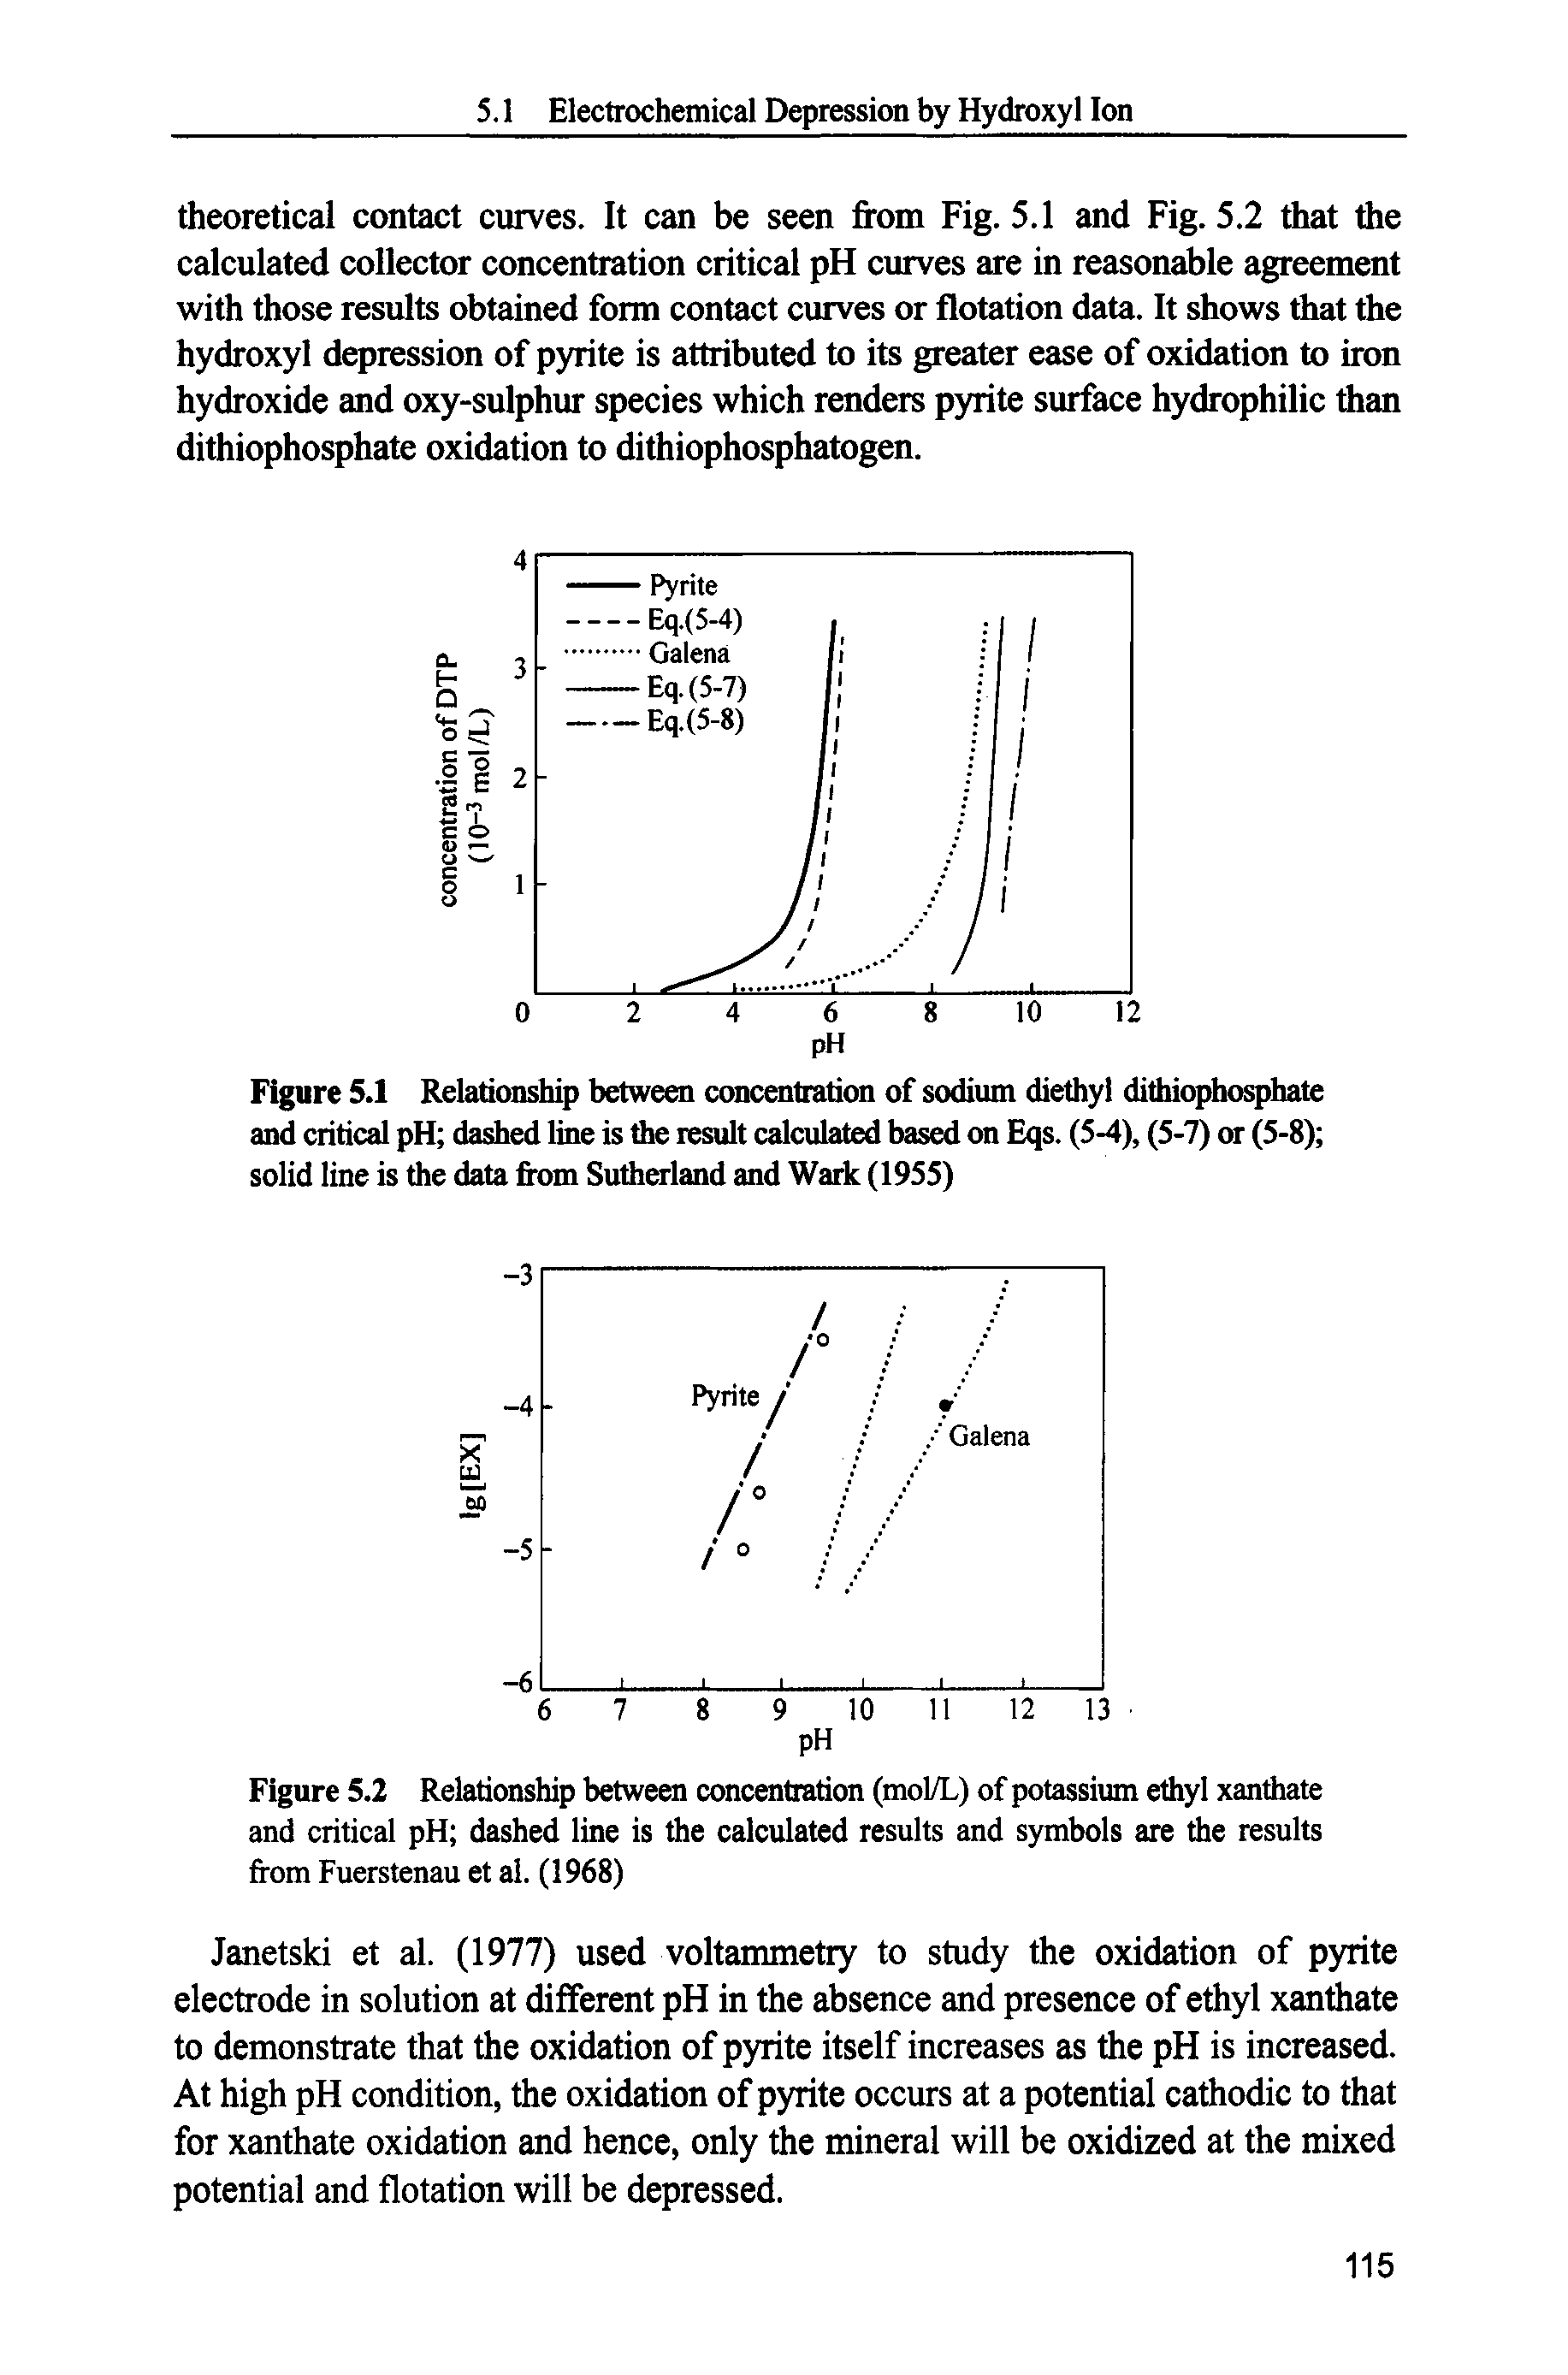 Figure 5.1 Relationship between concentration of sodium diethyl dithiophosphate and critical pH dashed line is the result calculated based on Eqs. (5-4), (5-7) or (5-8) solid line is the data from Sutherland and Wark (1955)...